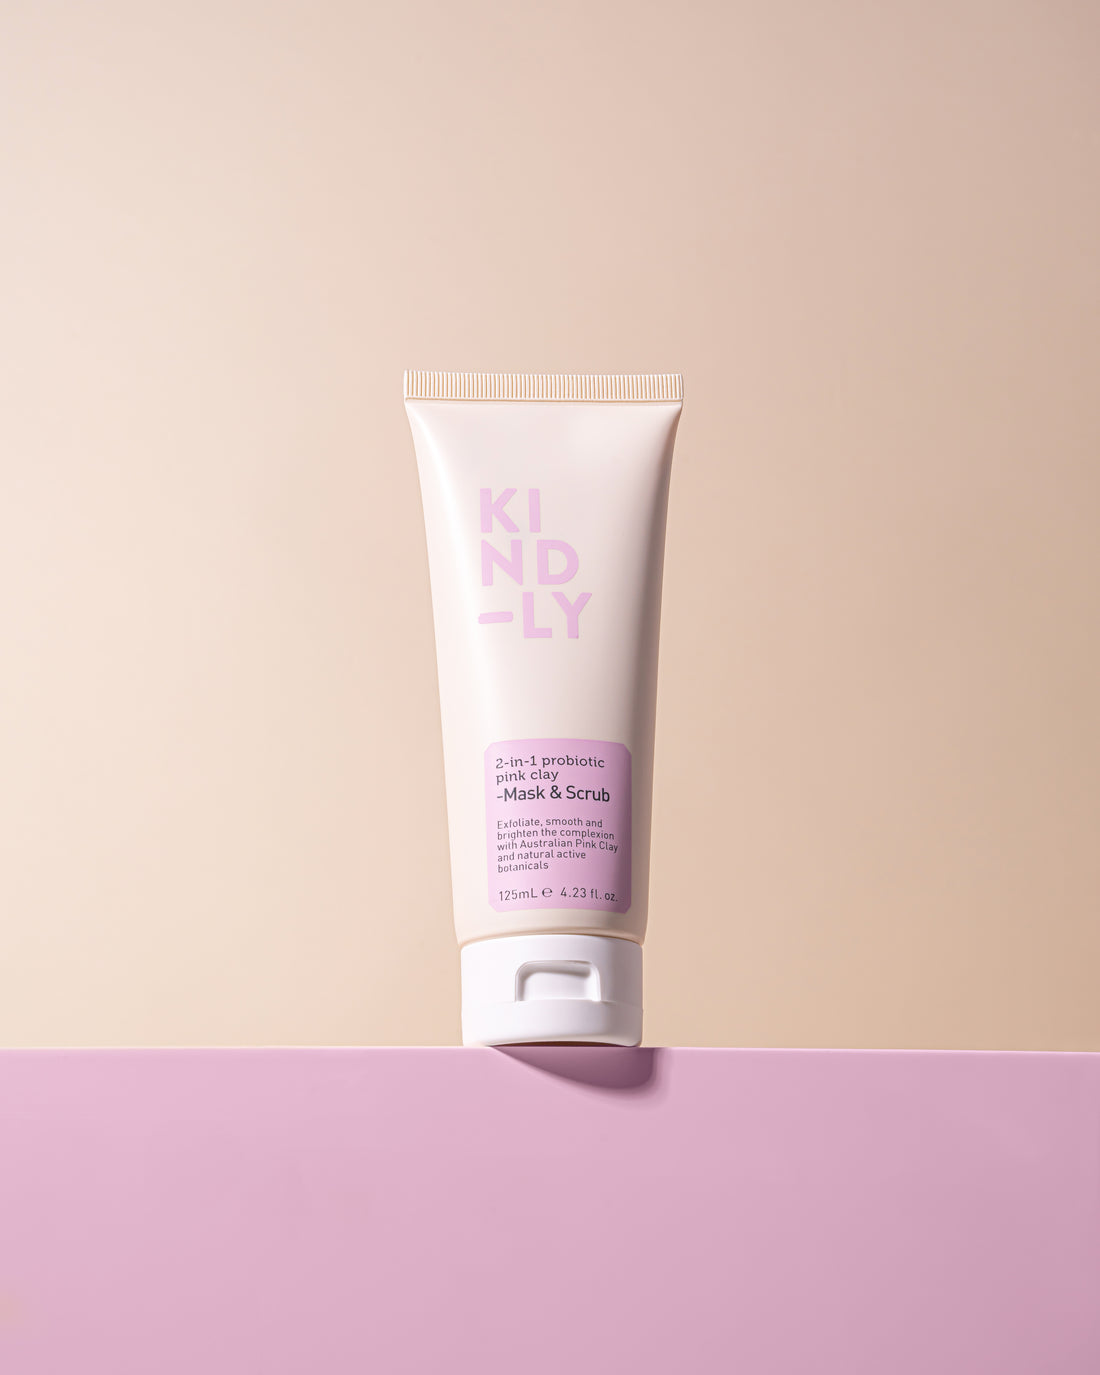 2-in-1 Probiotic Pink Clay Mask & Scrub